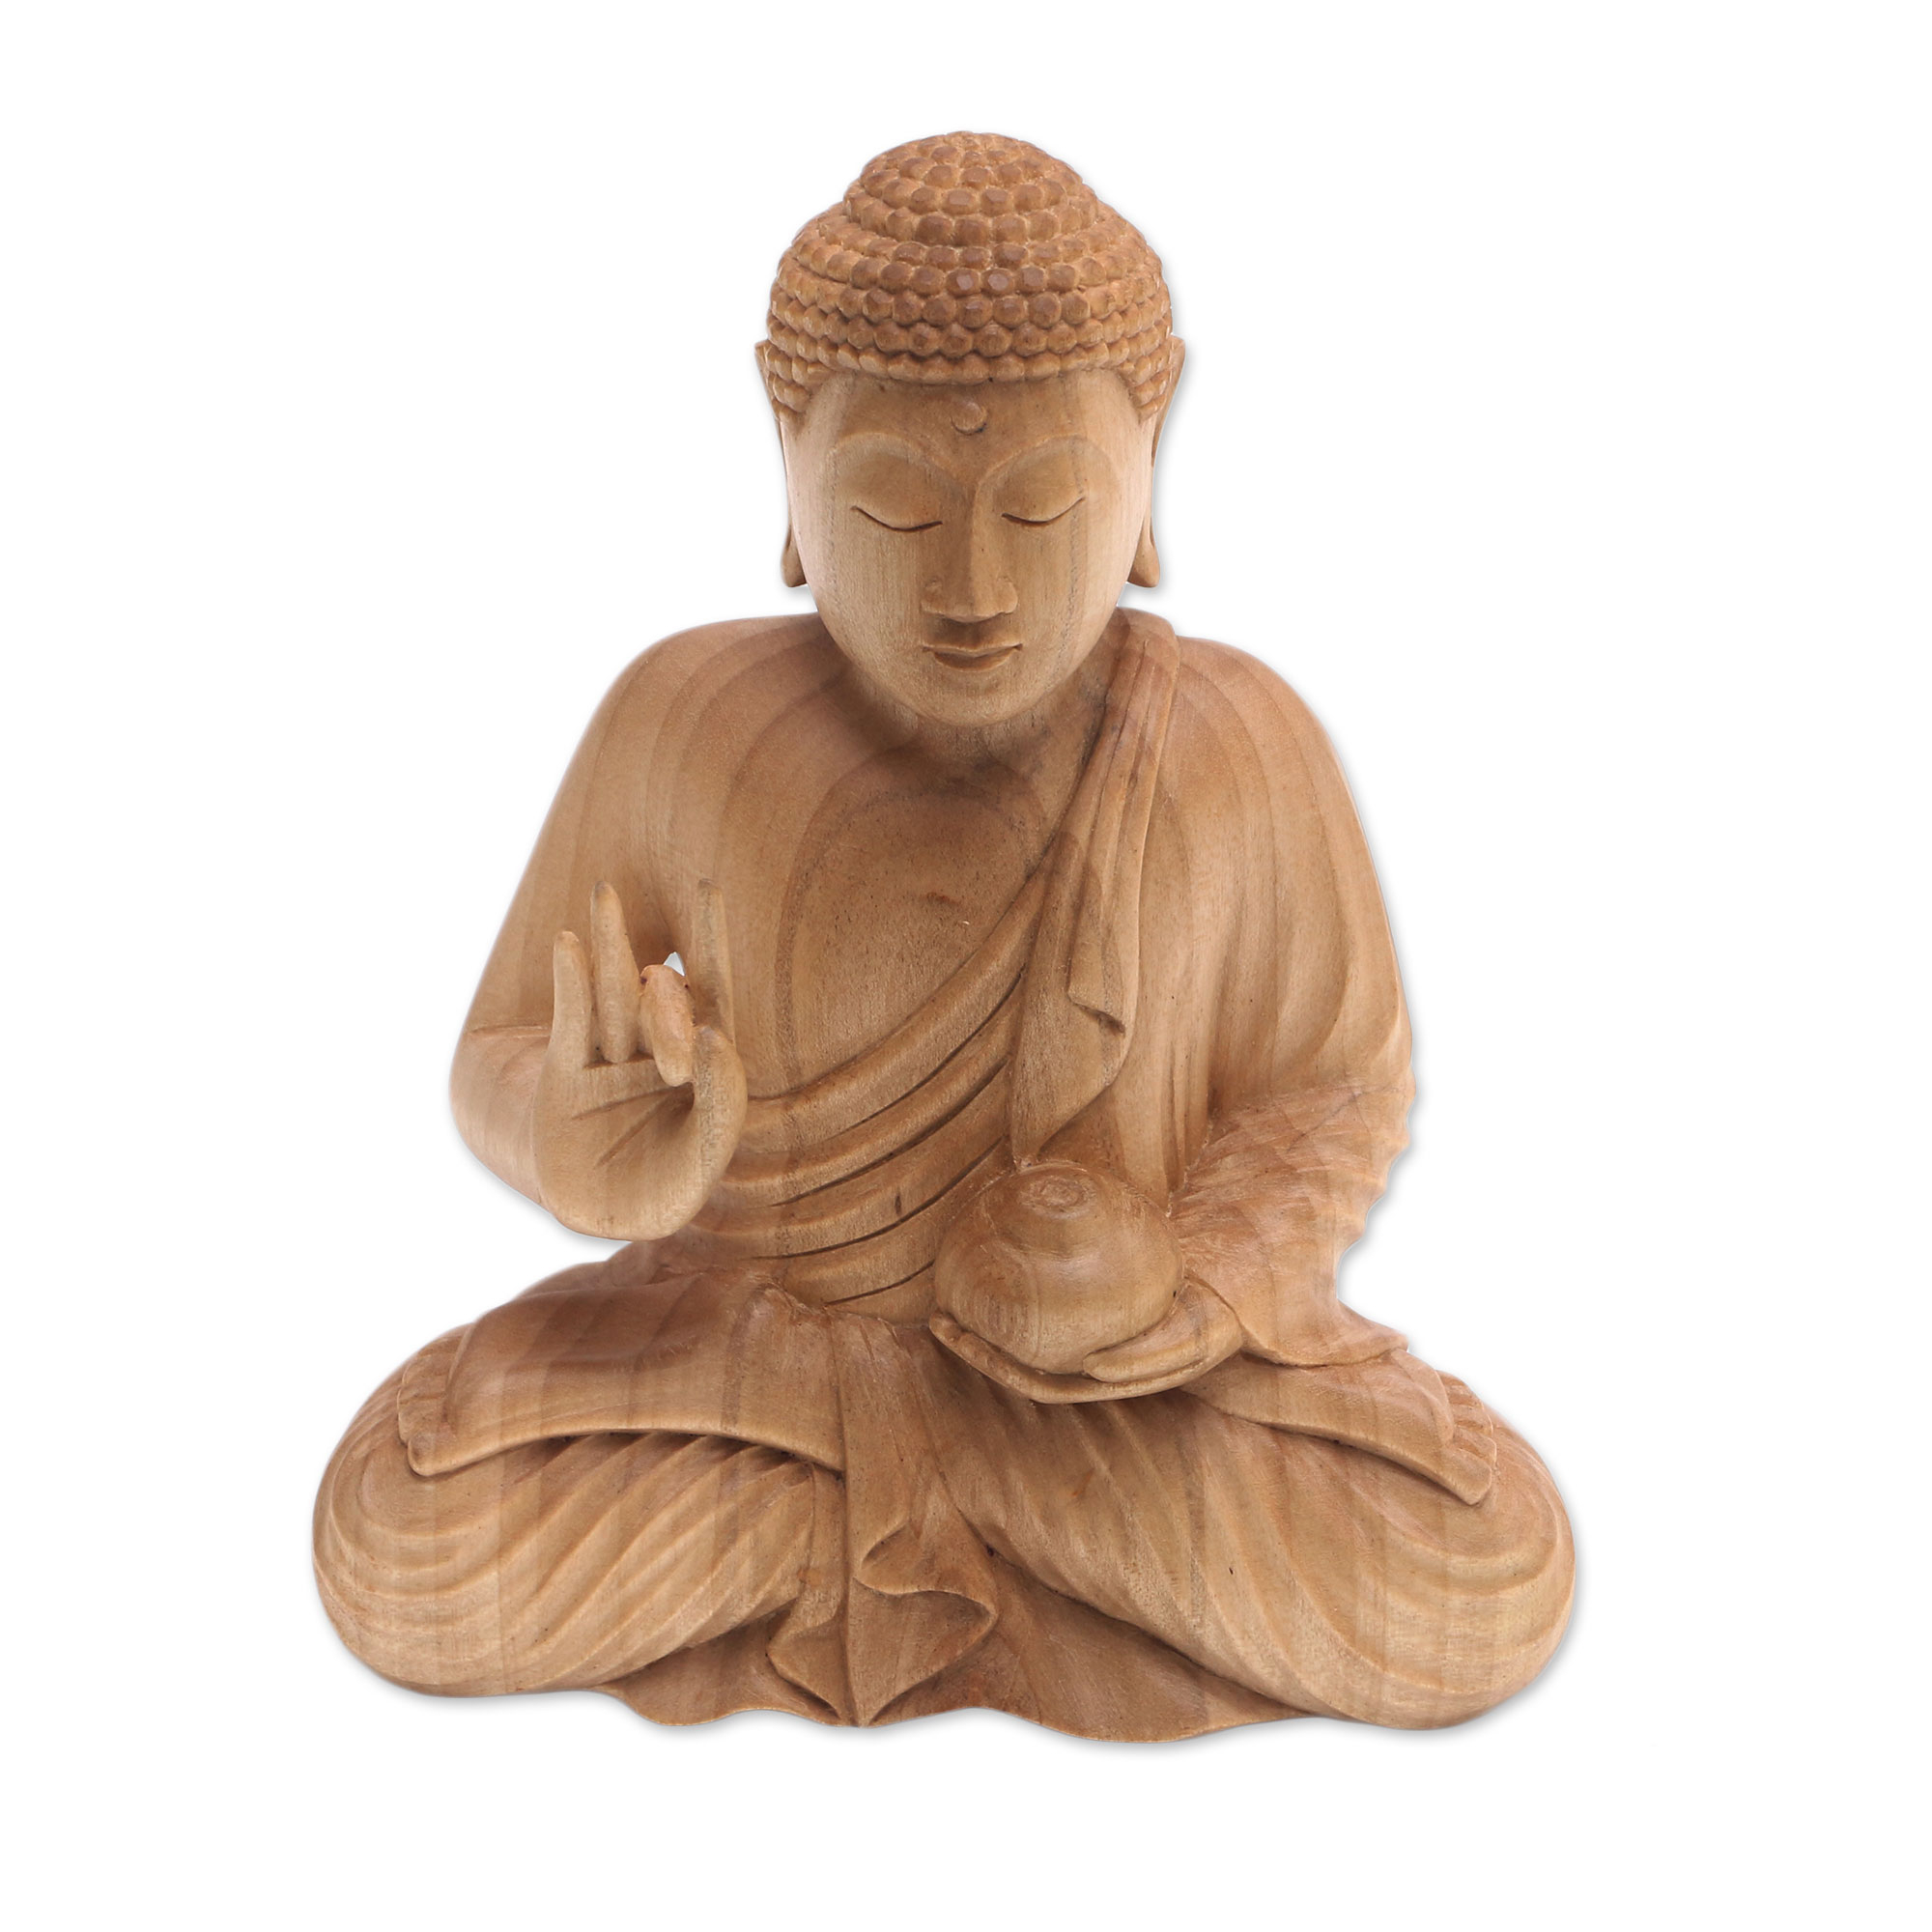 Hand-Carved Wood Sculpture of Buddha Holding a Vessel - Buddha's Vessel ...